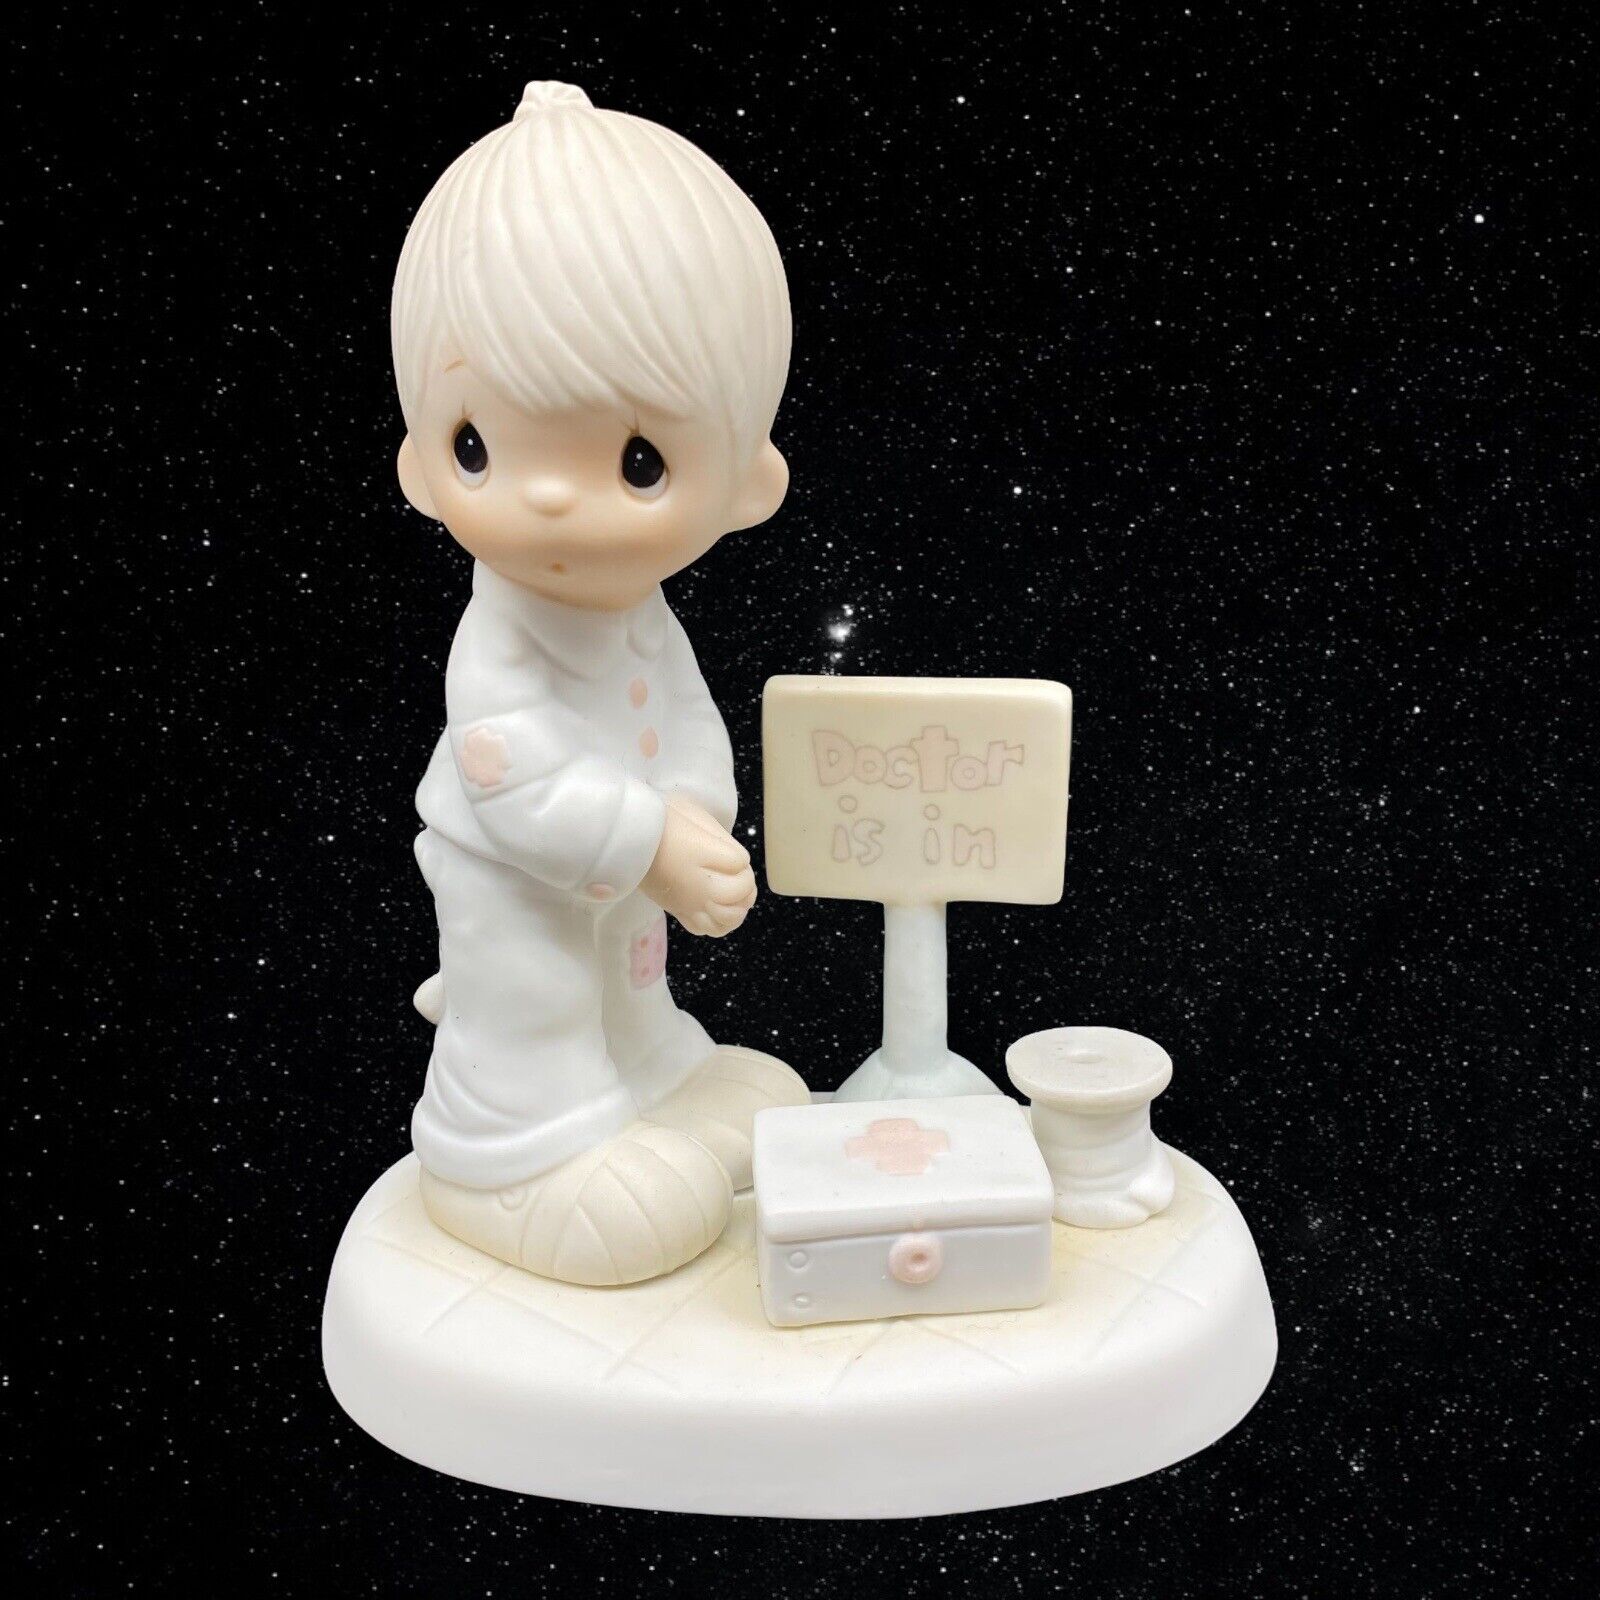 1981 Enesco Precious Moments Lord, Give Me Patience Figurine 4.5”T 4”W